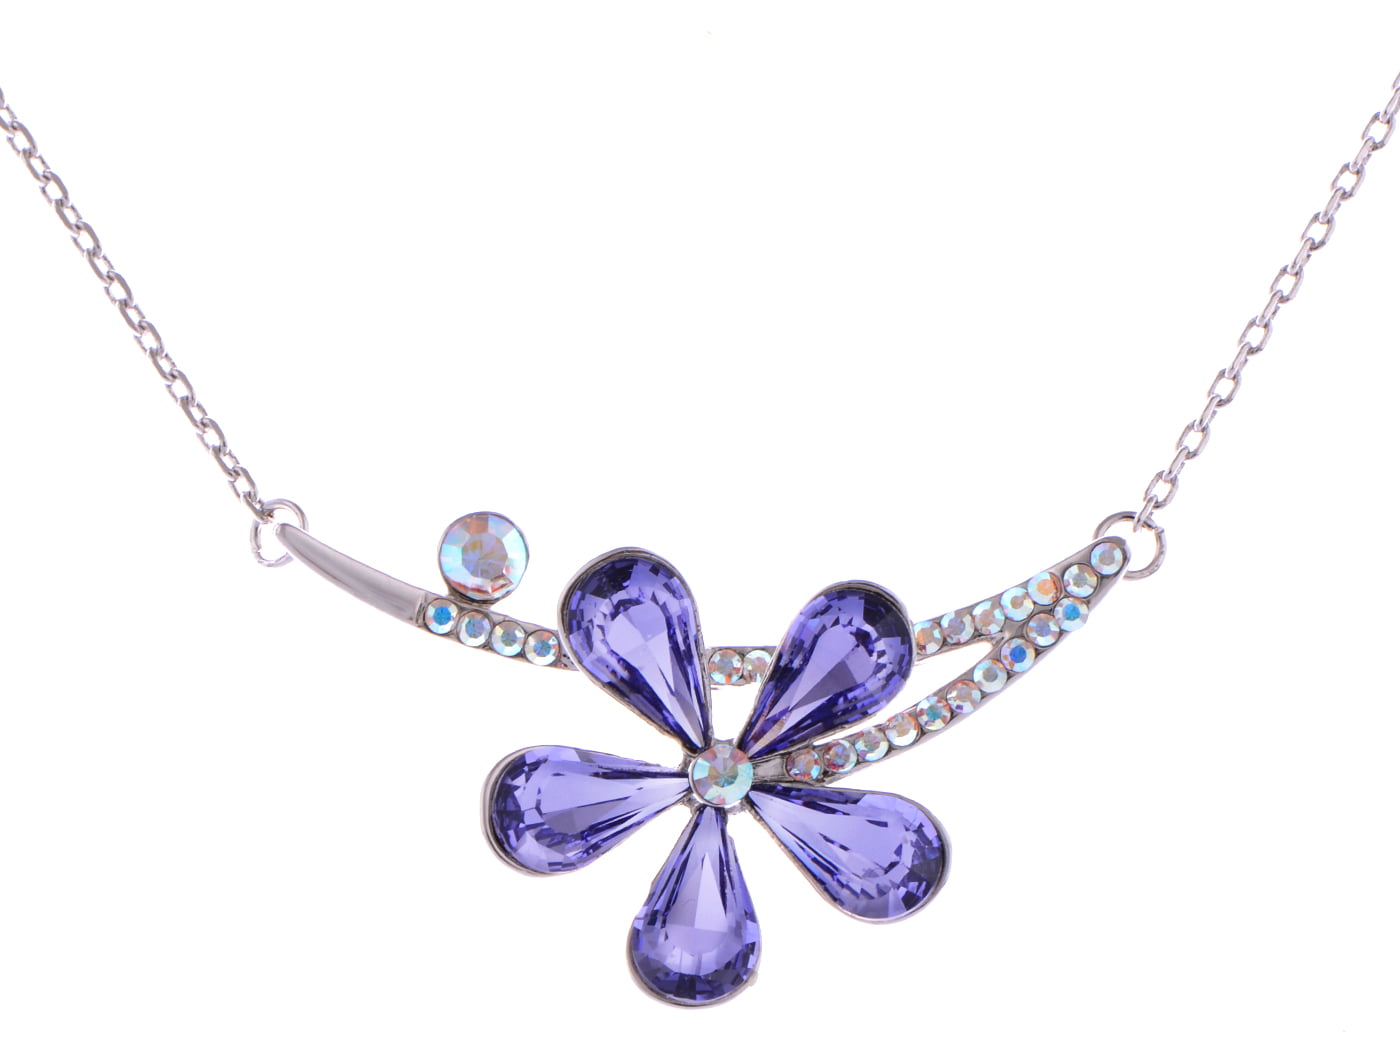 Swarovski Crystal Floral German Necklace- Imported from Germany